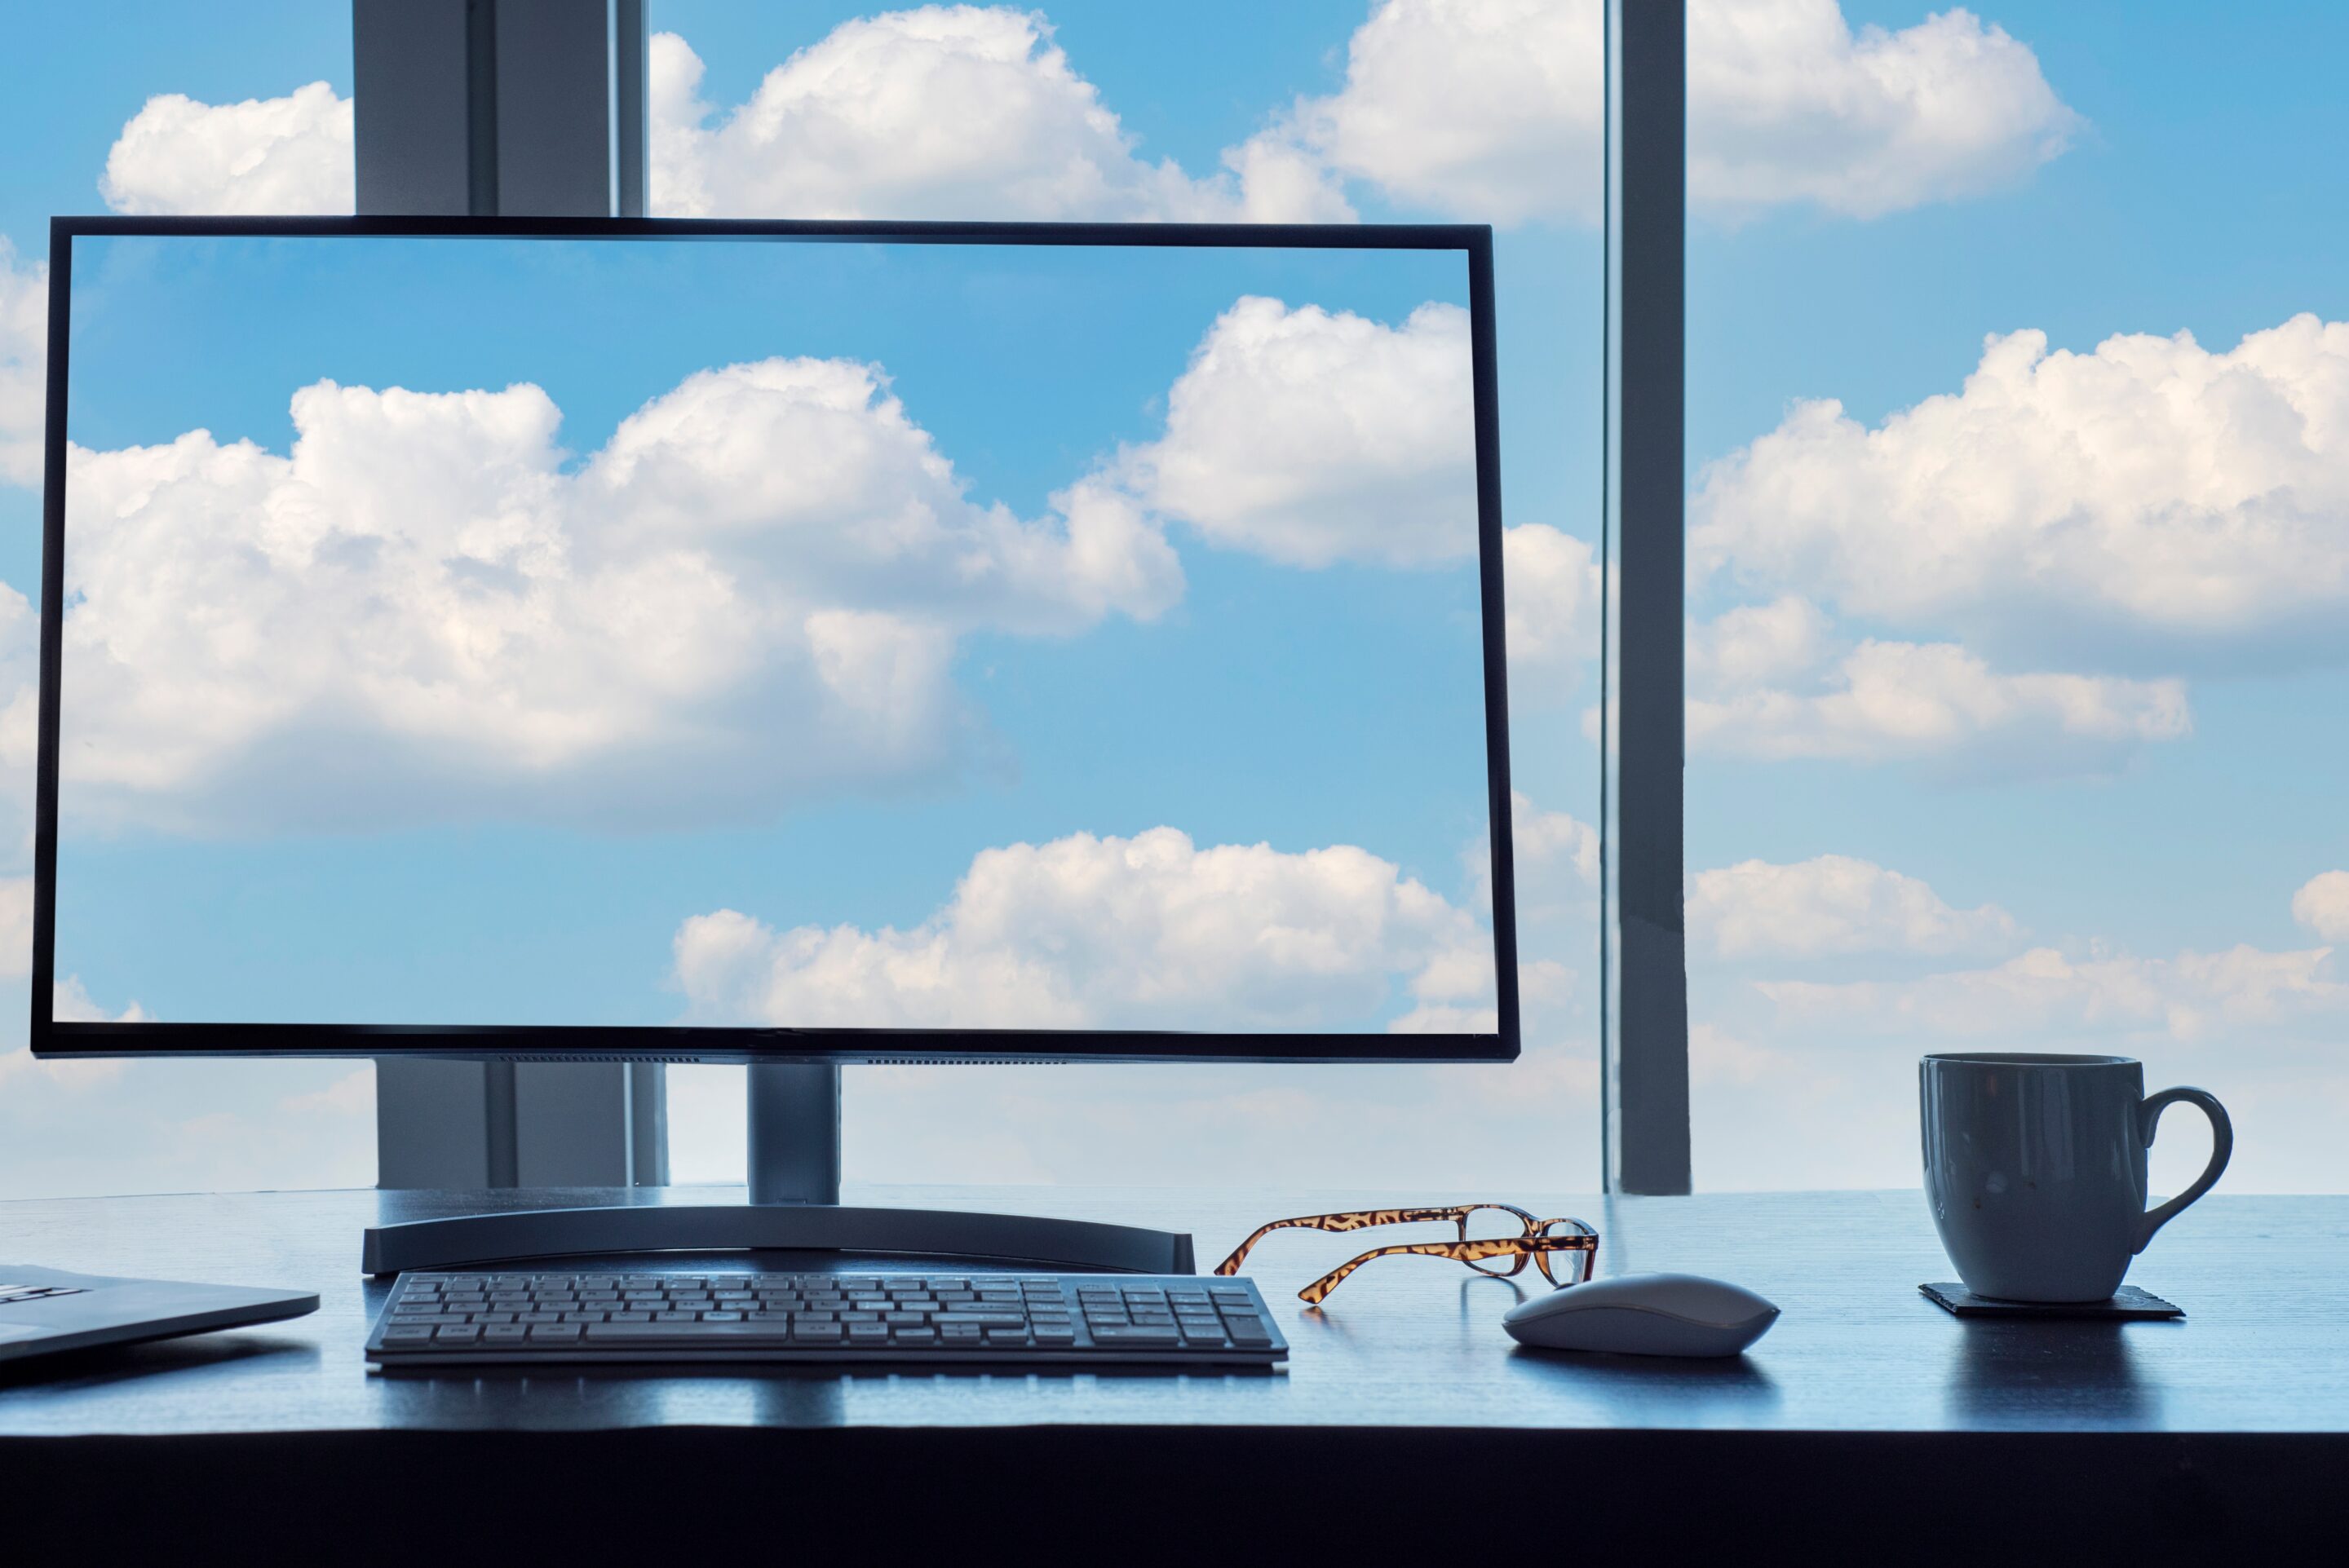 Utilize the benefits of cloud computing